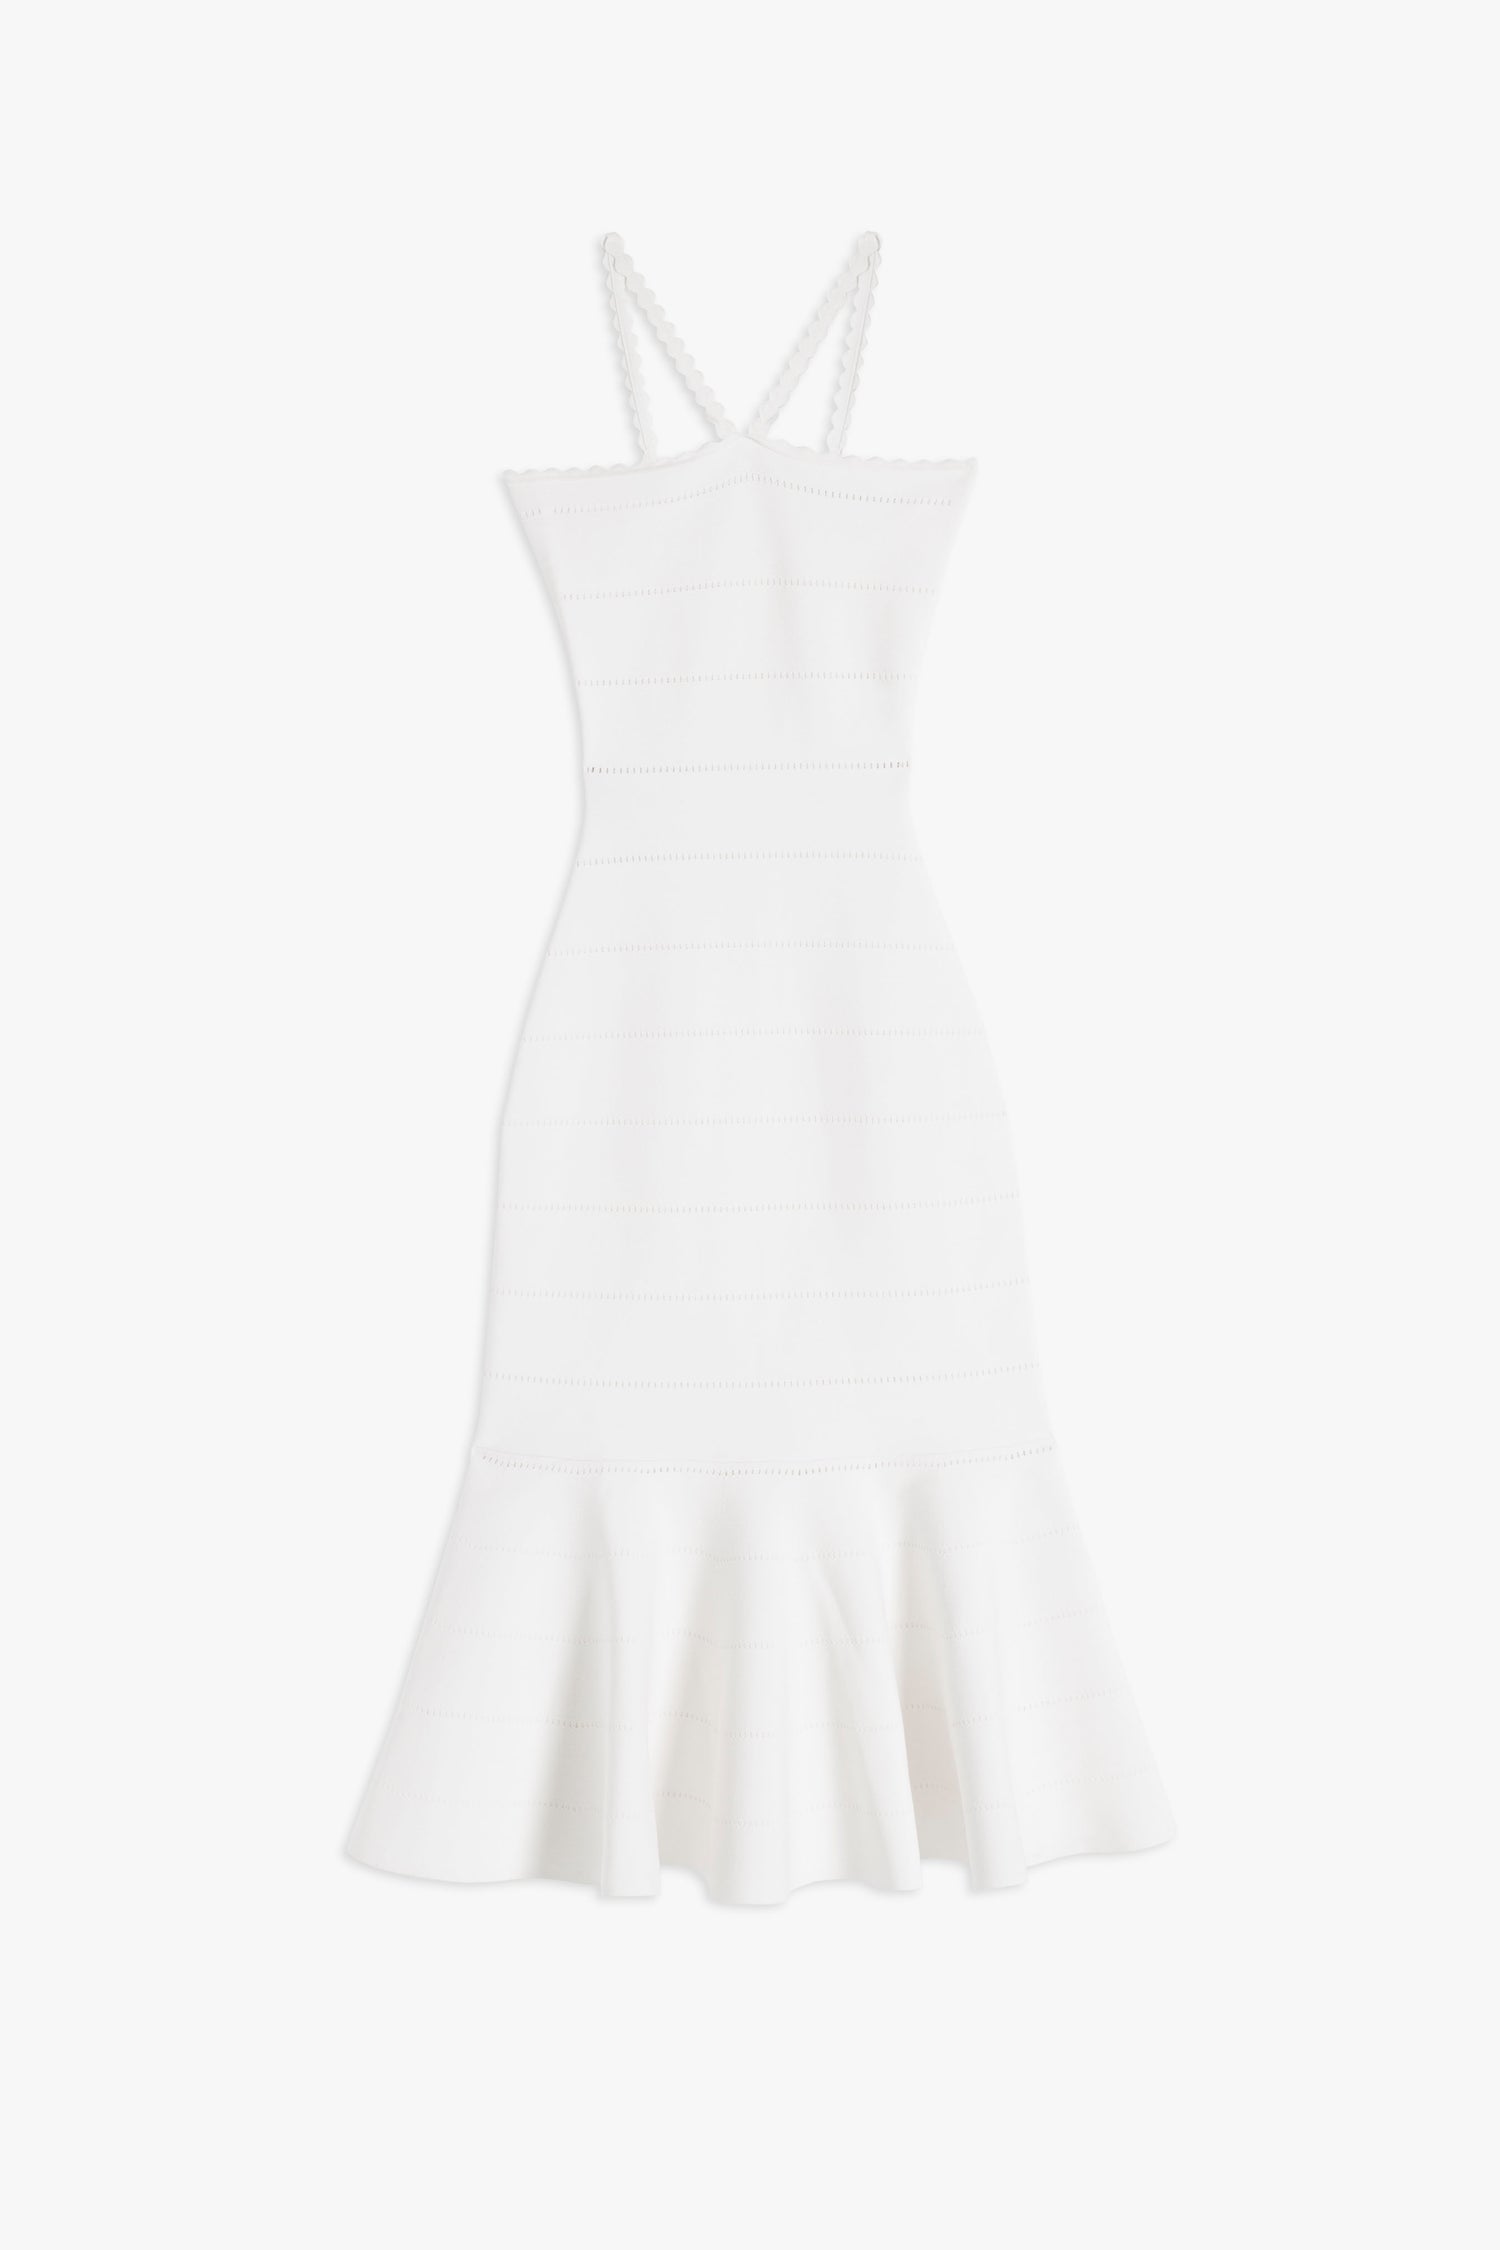 Product view of the the Scalloped Strap Flare Dress in white from Victoria Beckham, the body-con design with flounced hem and thin straping.